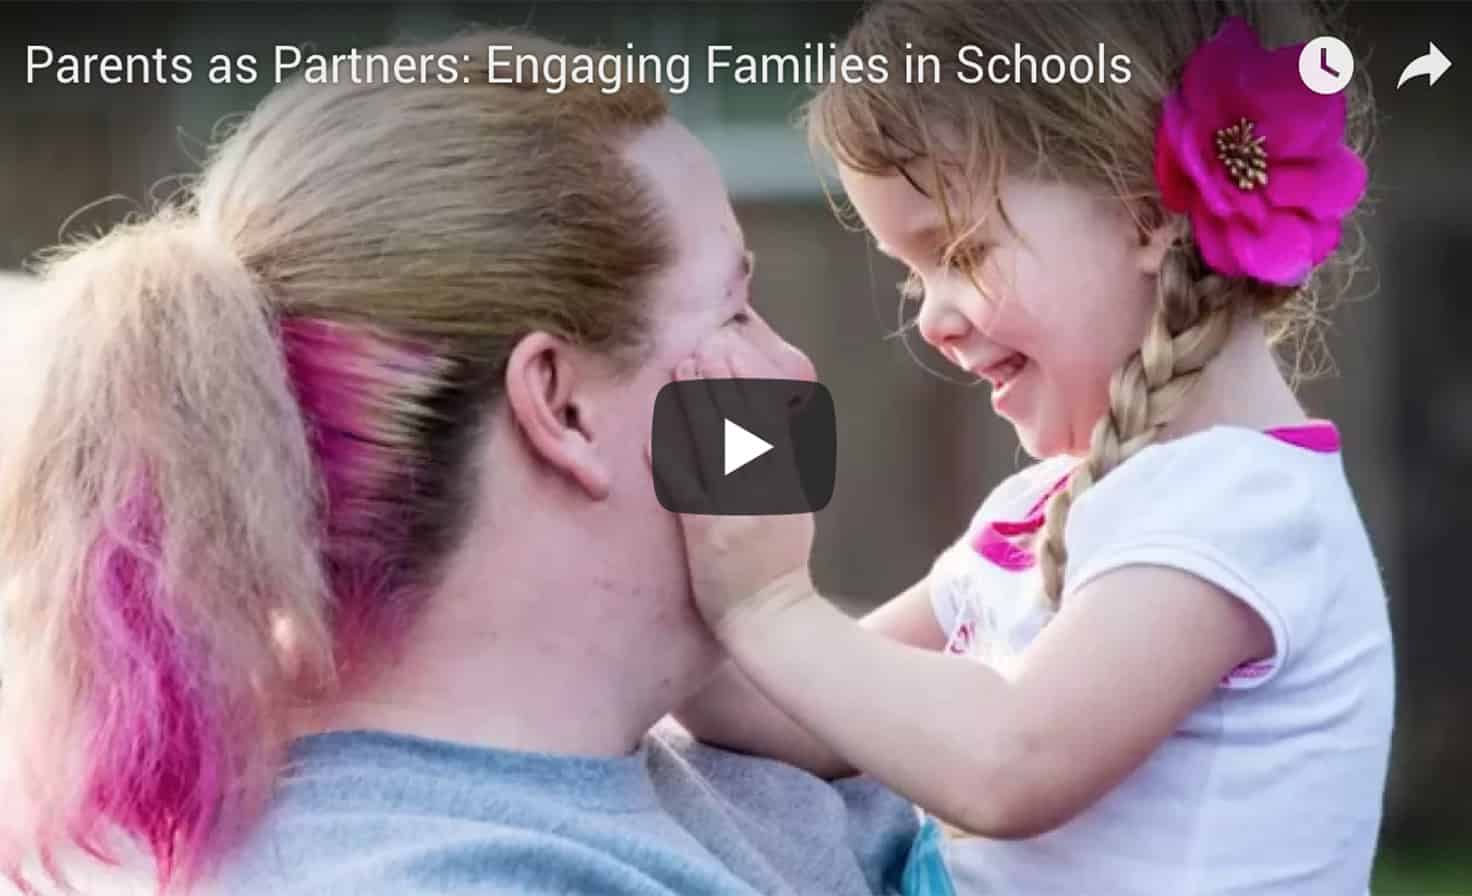 Parents as Partners: Engaging Families in Schools